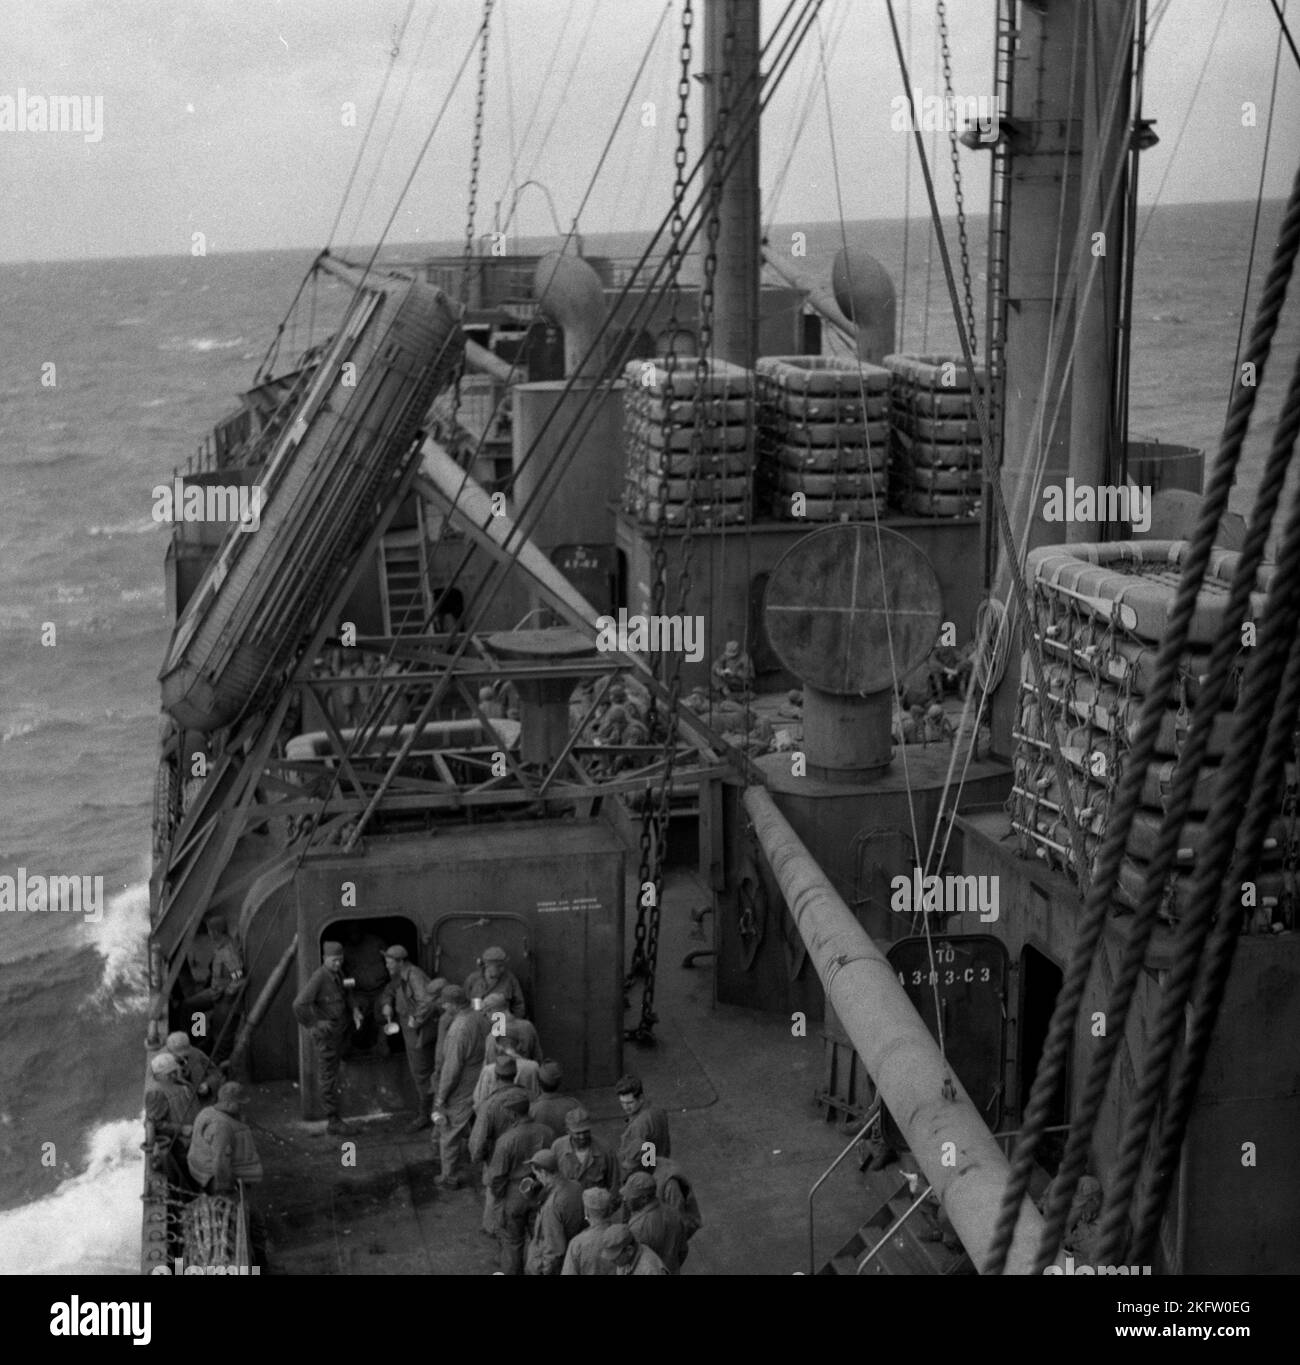 Men standing in line on deck of ship. United States Army veterans coming home on the Elgin Victory ship at the conclusion of World War II. SS Elgin Victory, a type VC2-S-AP2 Victory ship built by Permanente Metals Stock Photo